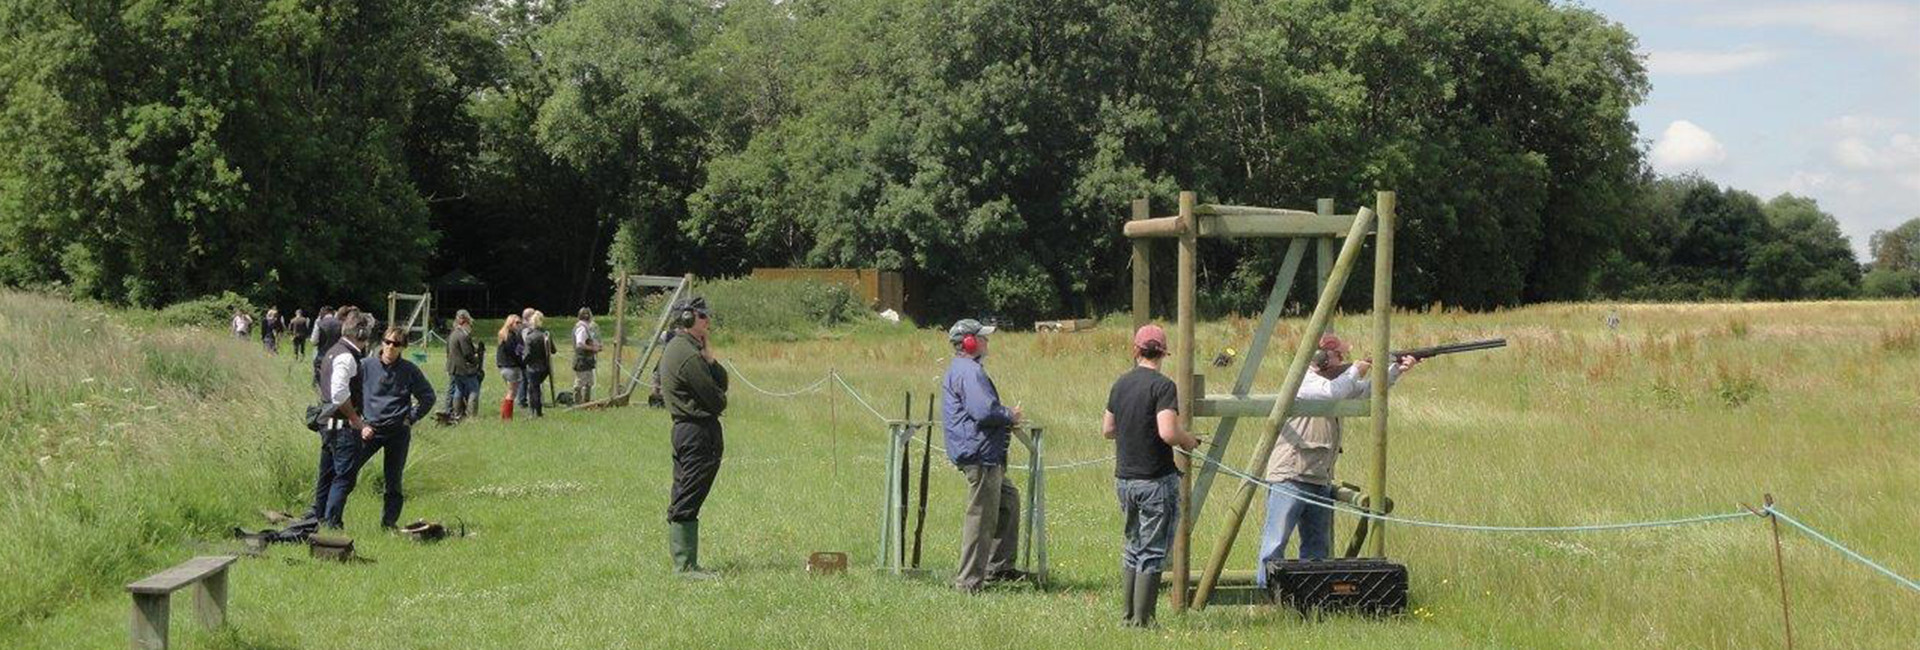 Clay Target Shooting Outdoors